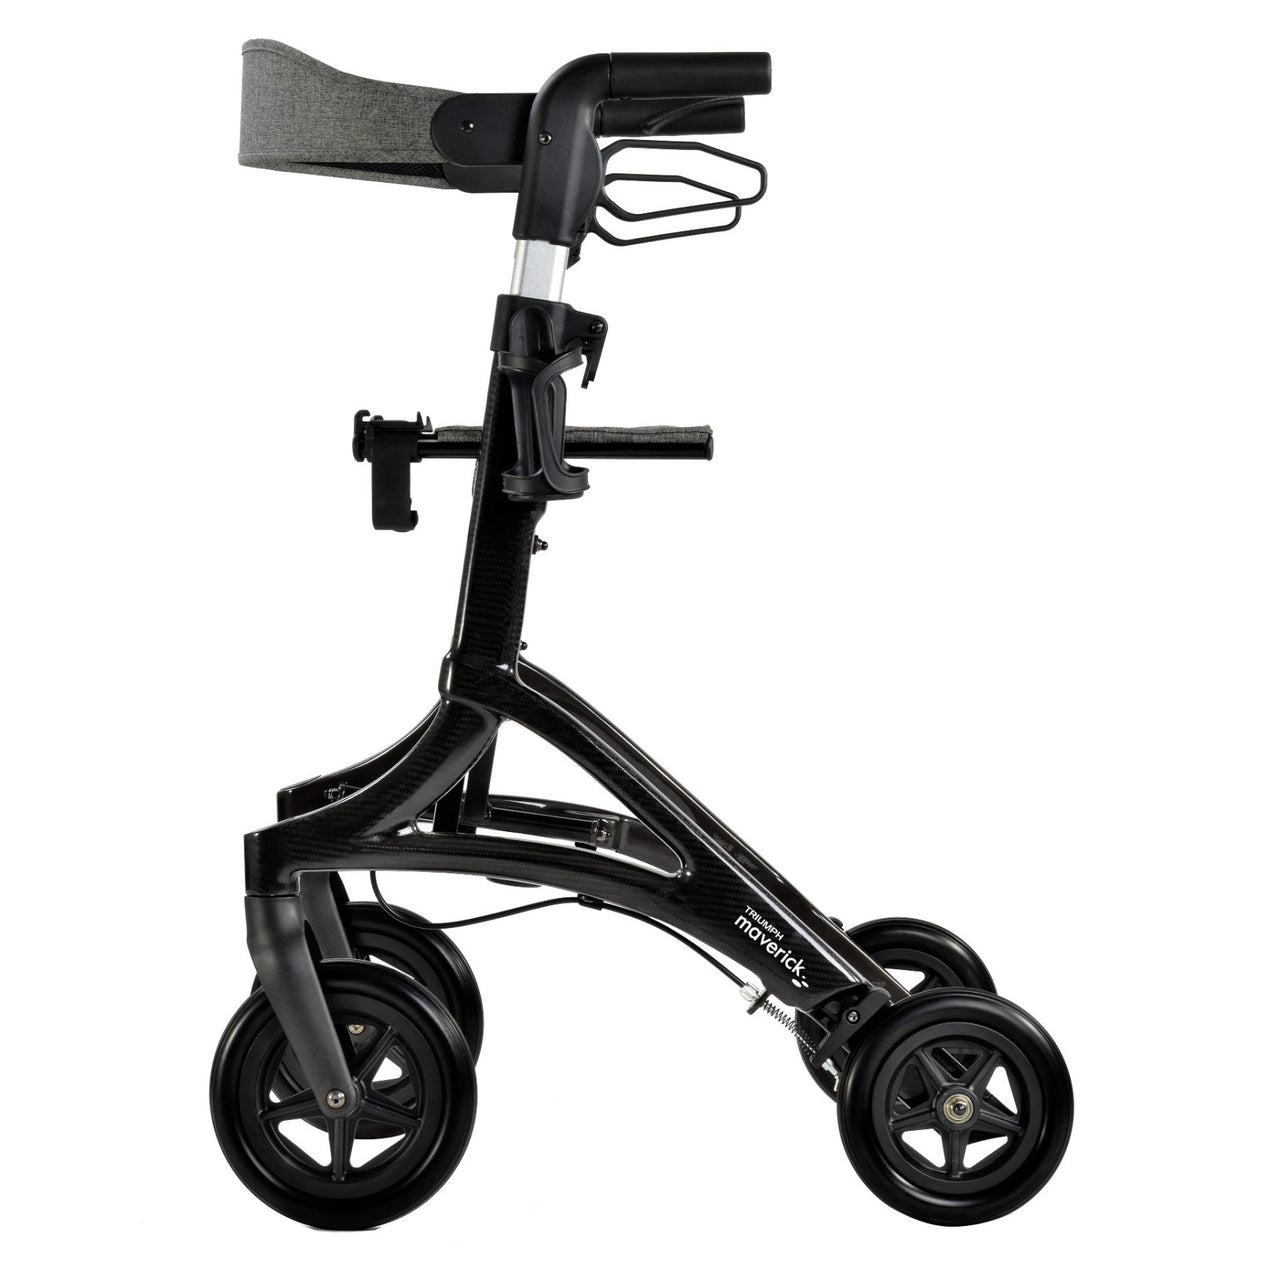 Feather Mobility Scooter™ - Lightest Electric Scooter 37 lbs.